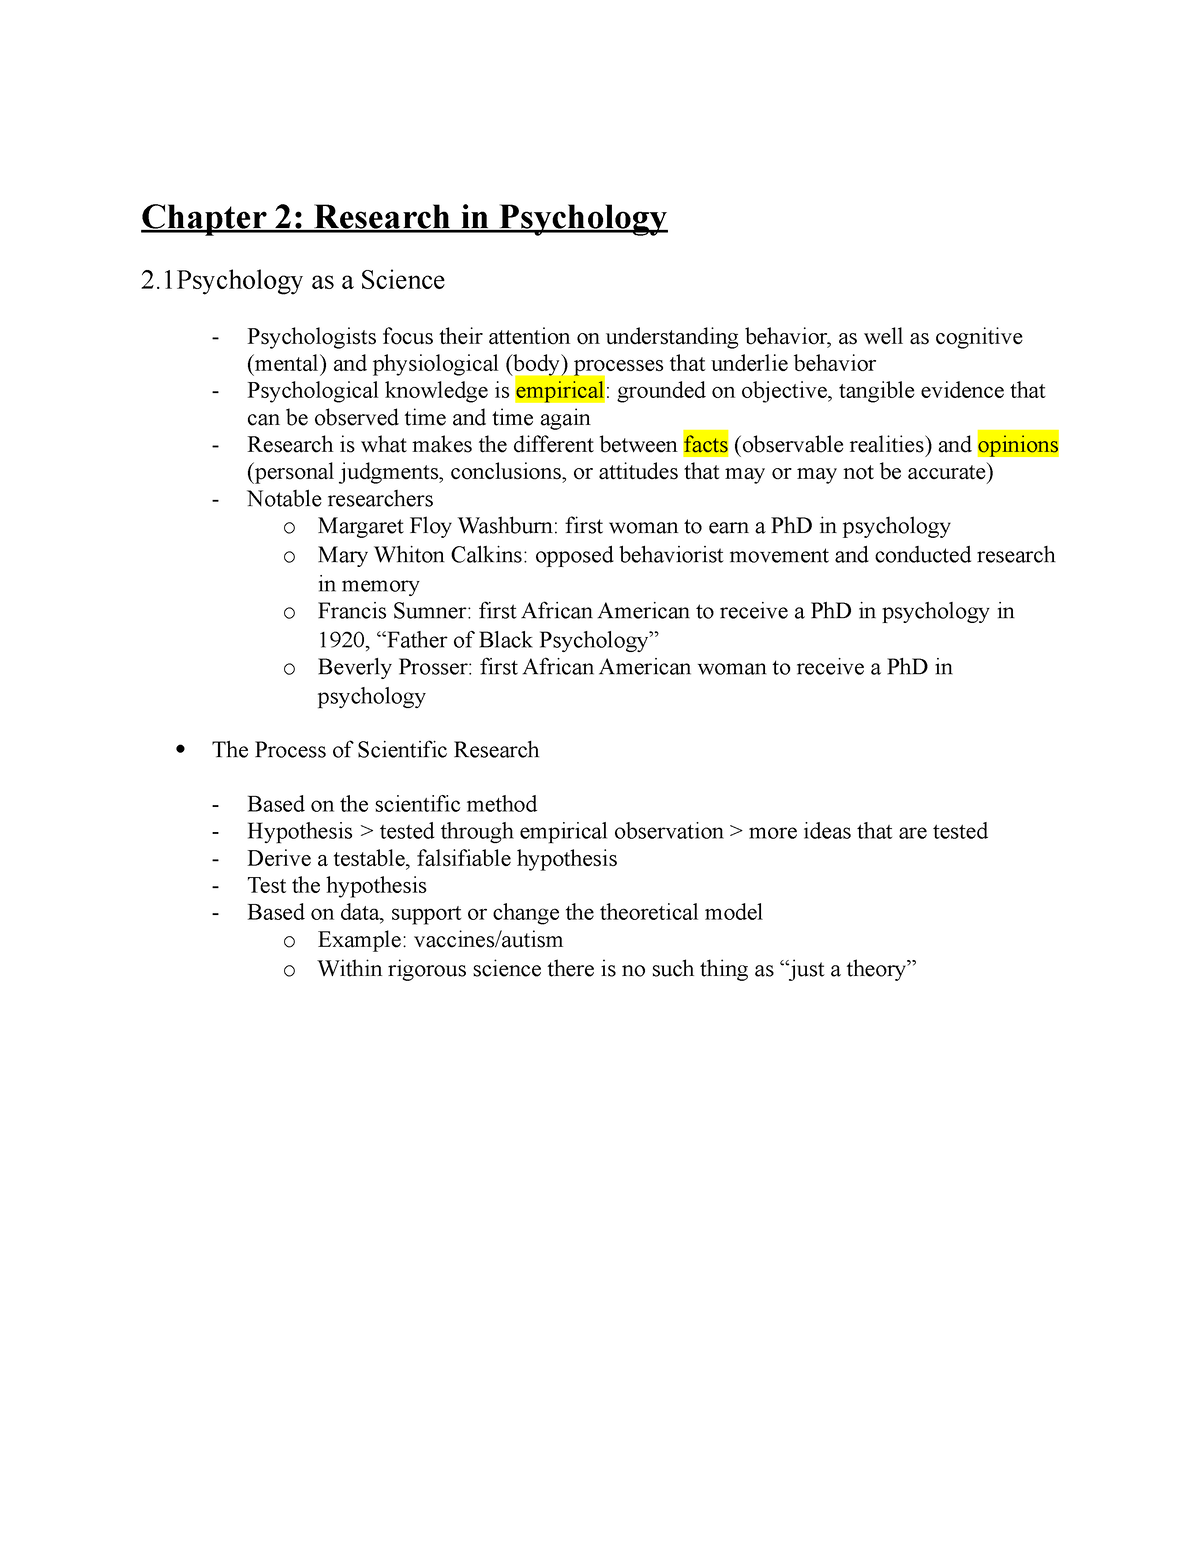 chapter 2 research includes